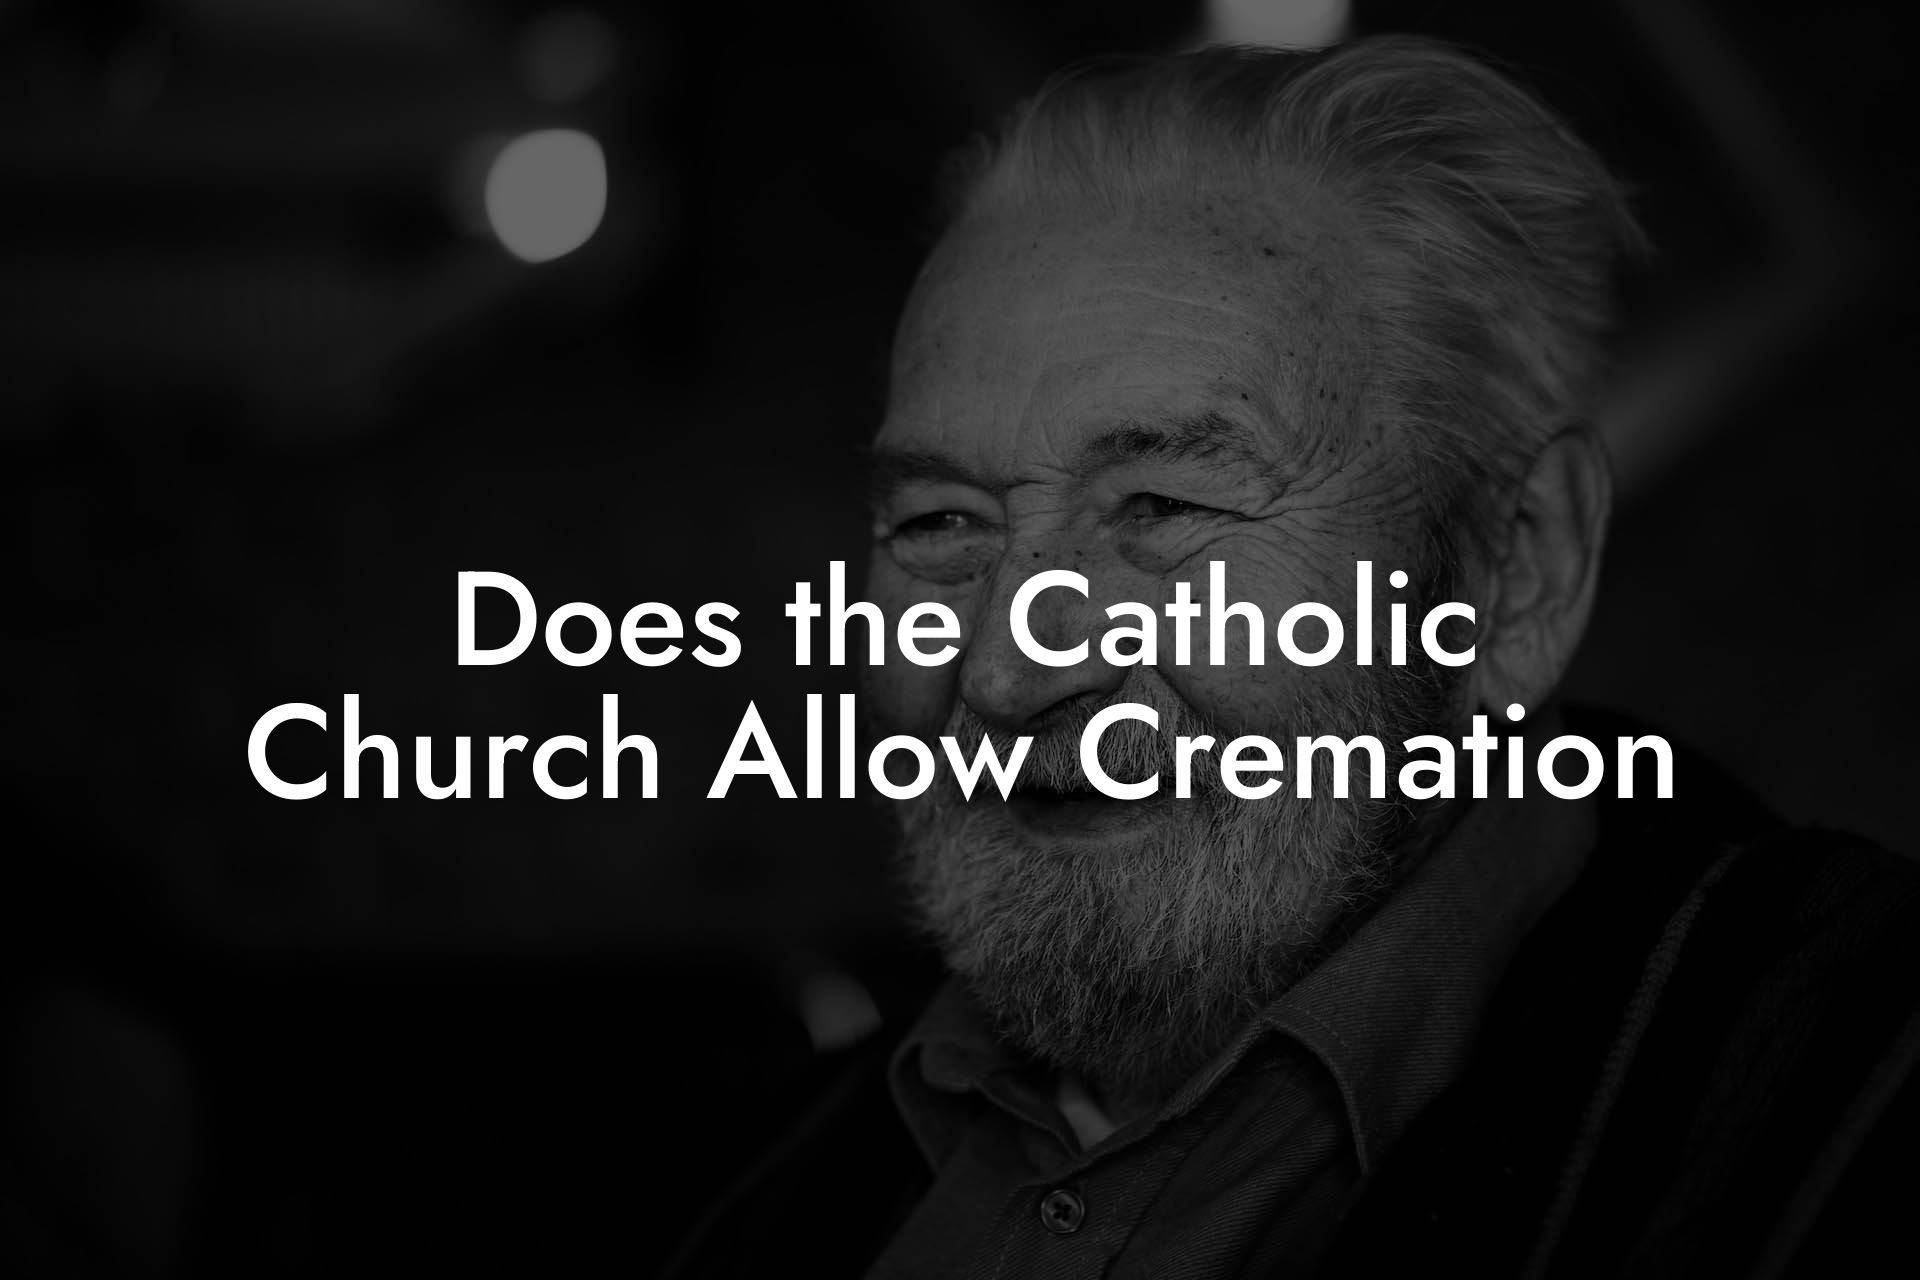 Does the Catholic Church Allow Cremation